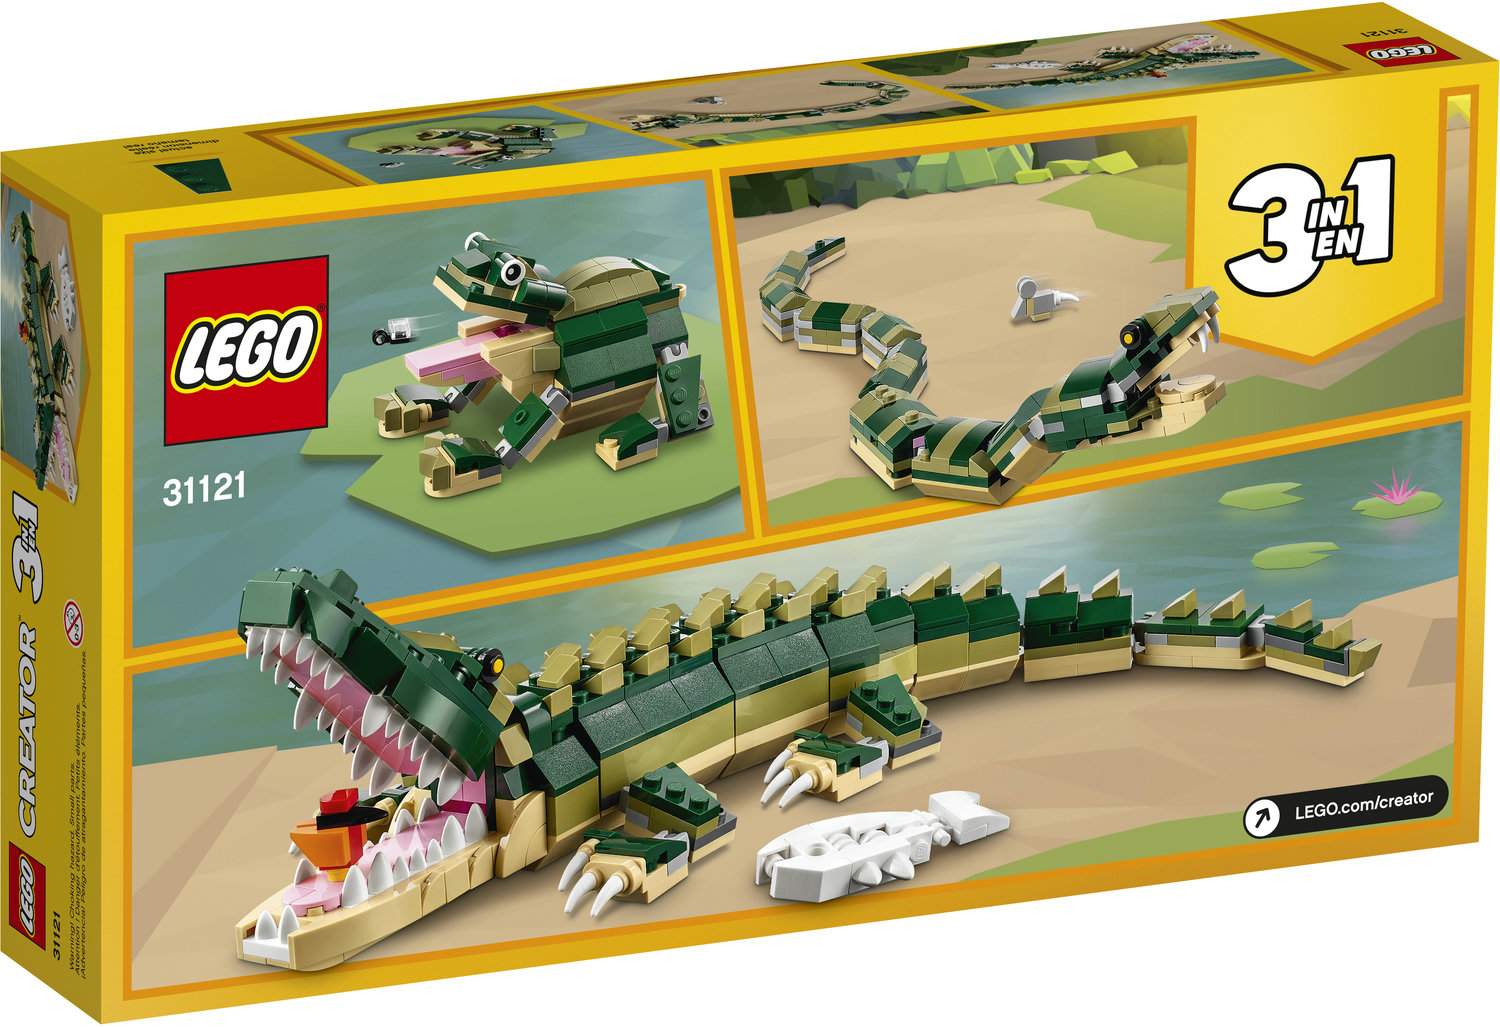 LEGO Creator 3in1 Crocodile 31121 Building Toy Featuring Wild Animal Toys for Kids (454 Pieces) - image 4 of 10